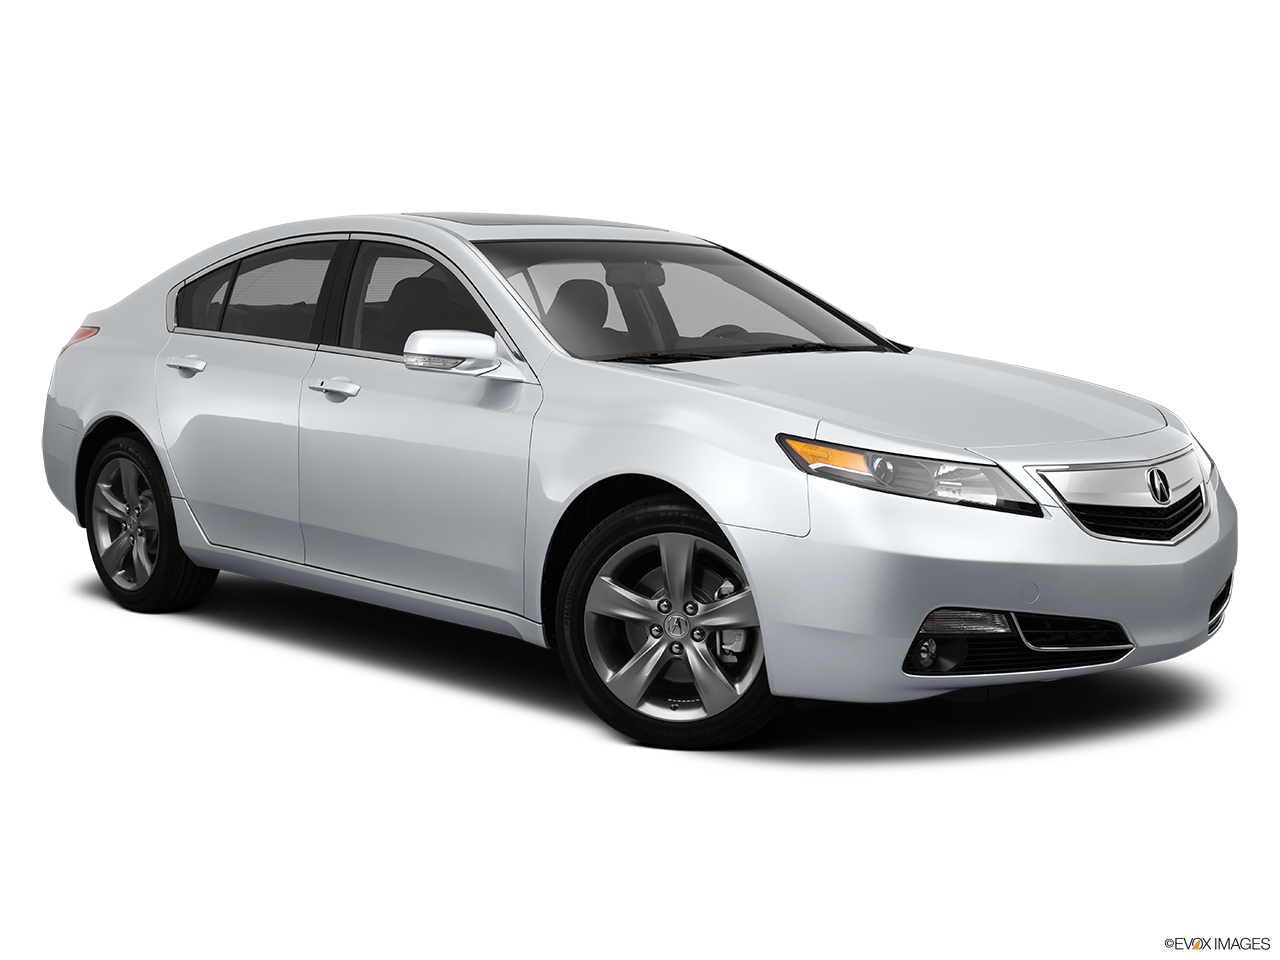 2013 Acura TL SH-AWD Front passenger 3/4 w/ wheels turned. 